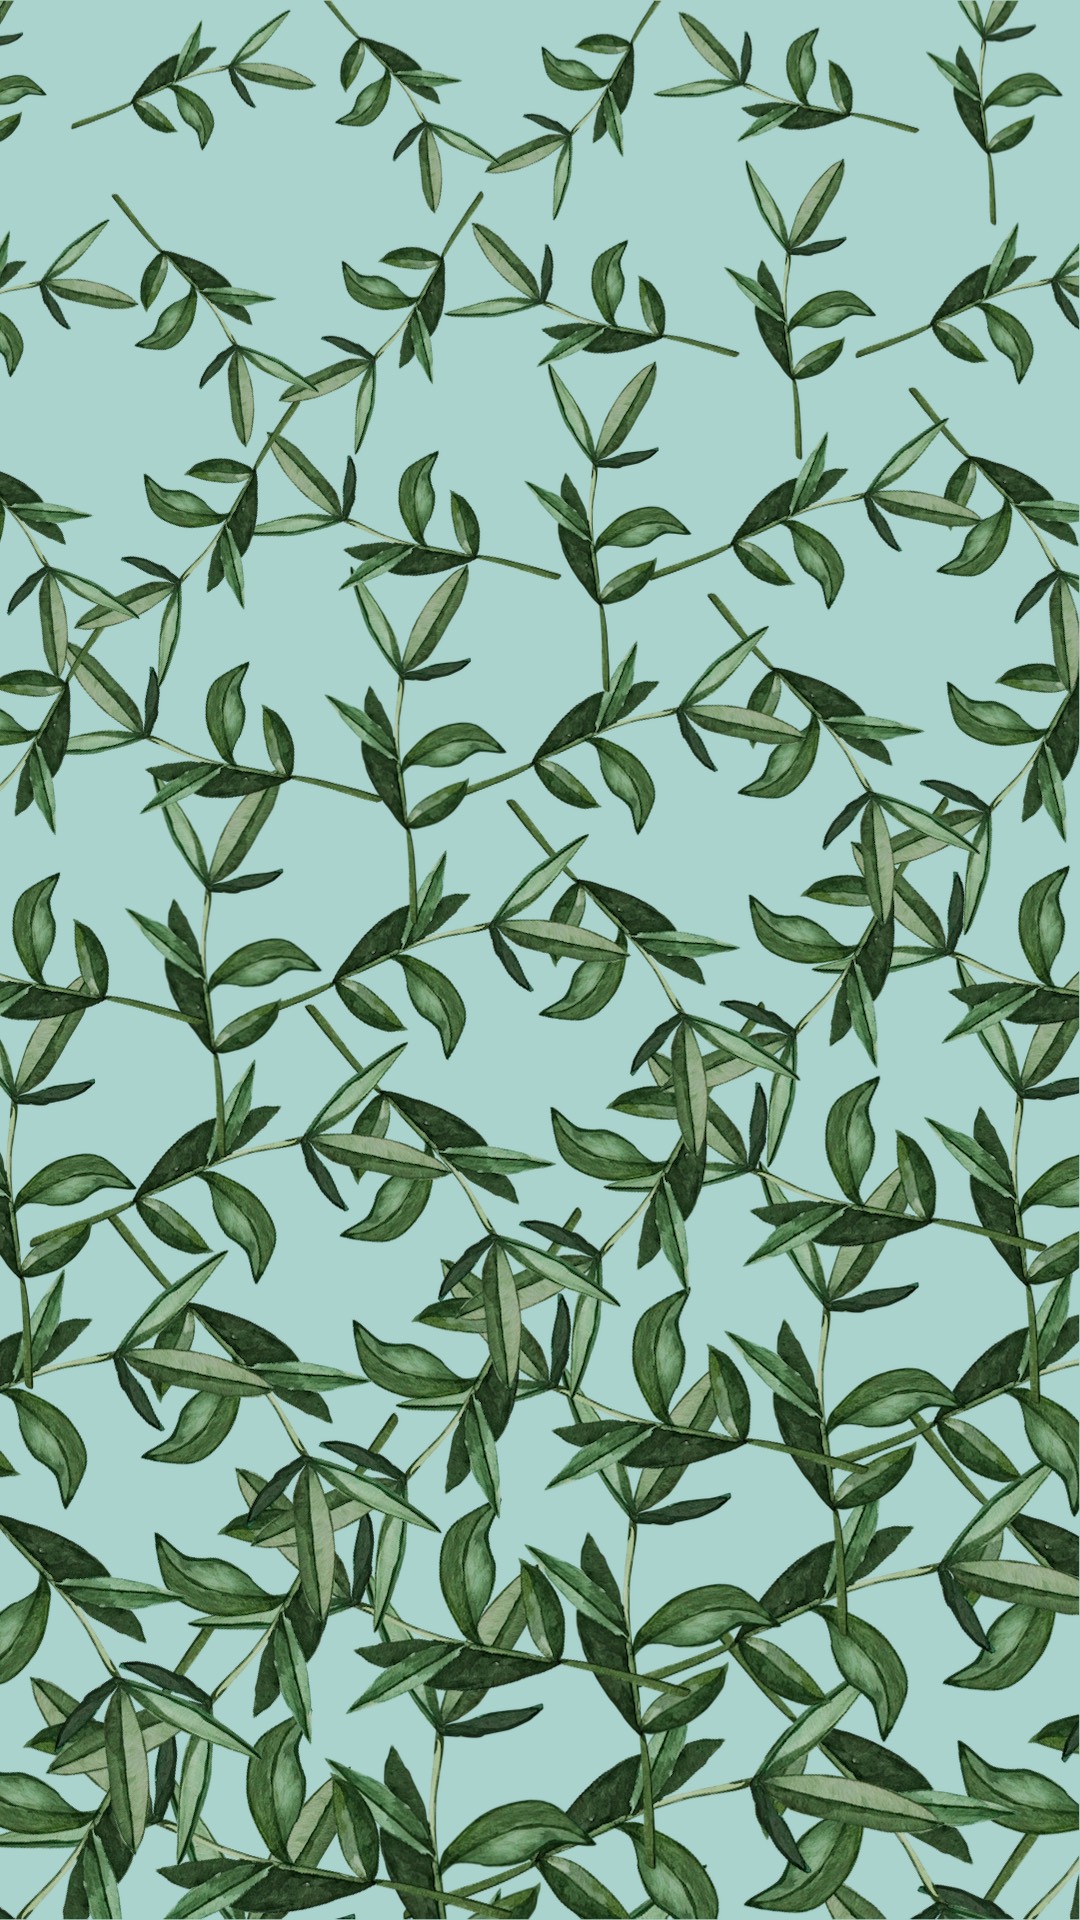 A Picture Of A Bunch Of Leaves On A Blue Background Zoom Backgrounds Template